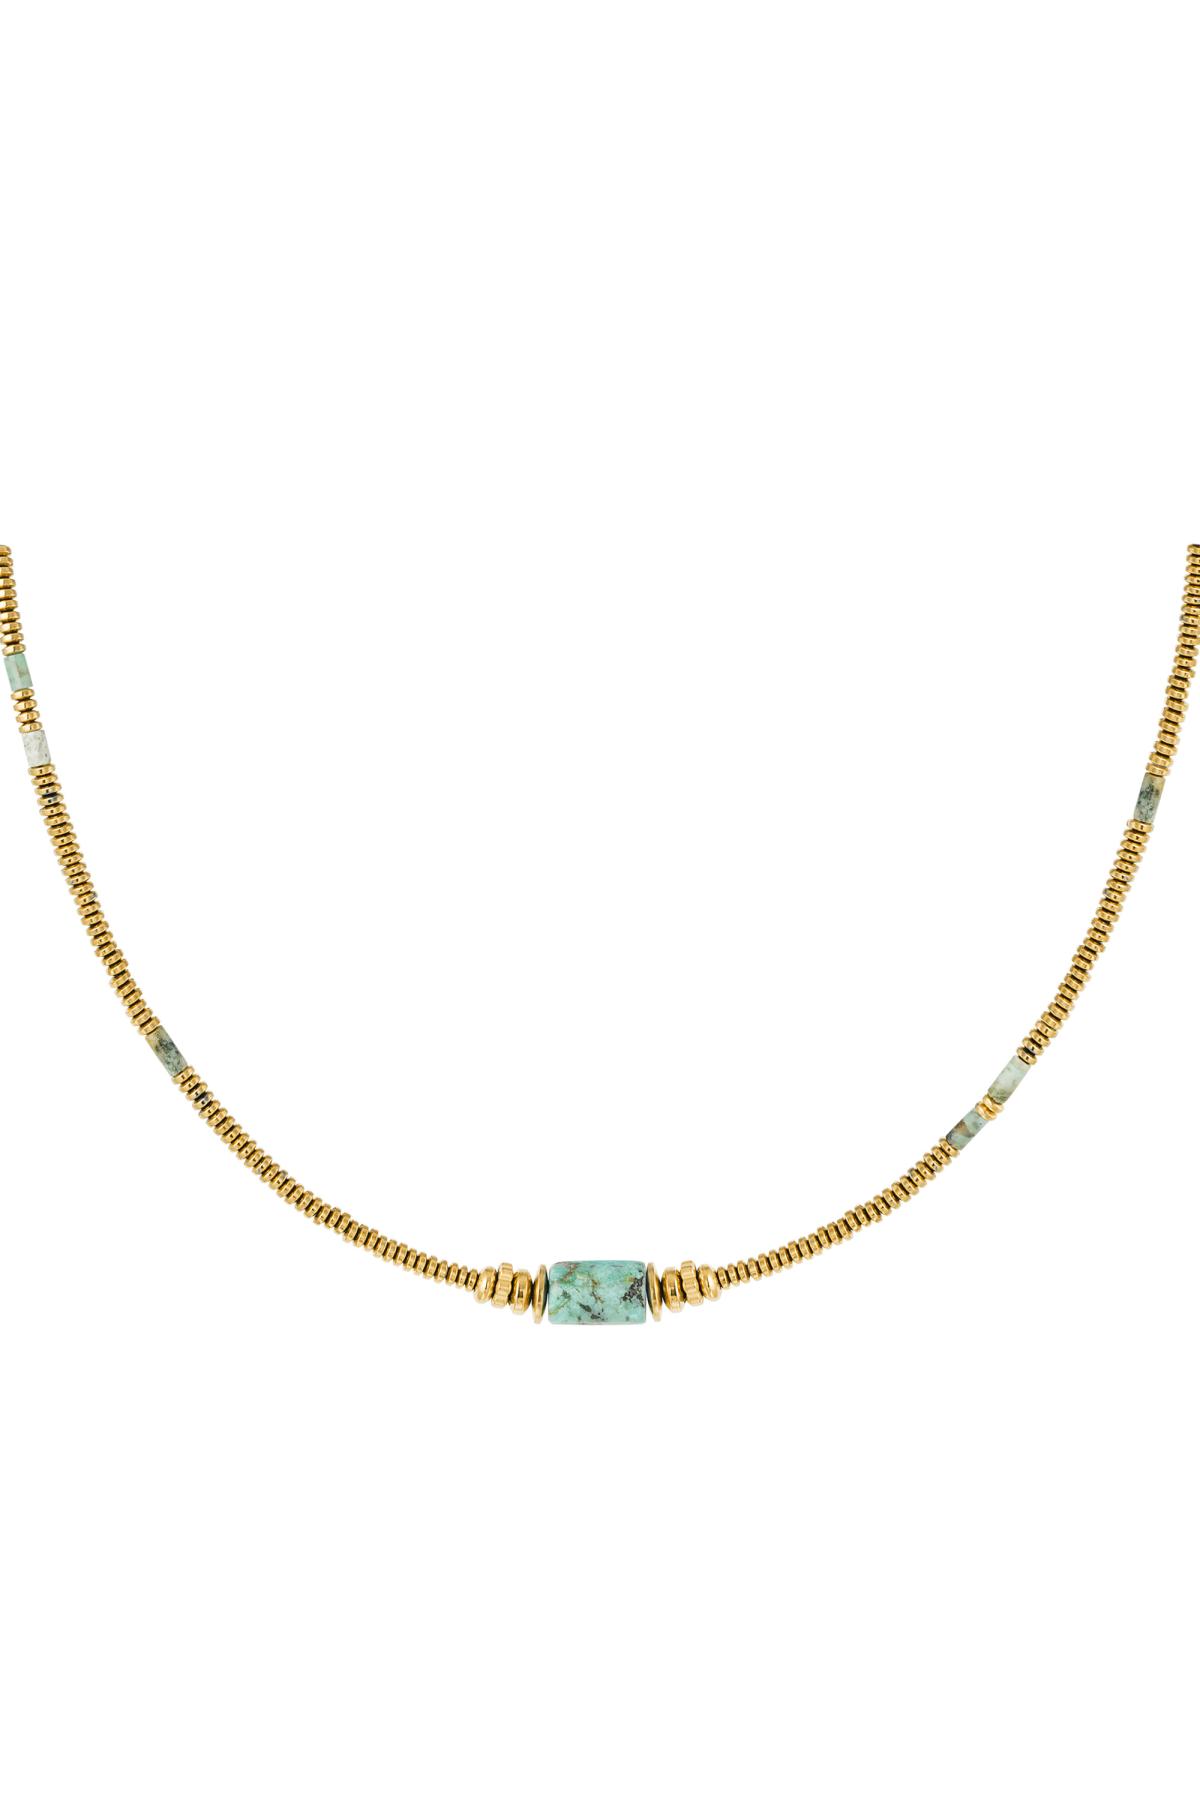 Necklace thin beads with charm - Natural Stones collection Green & Gold Stainless Steel h5 